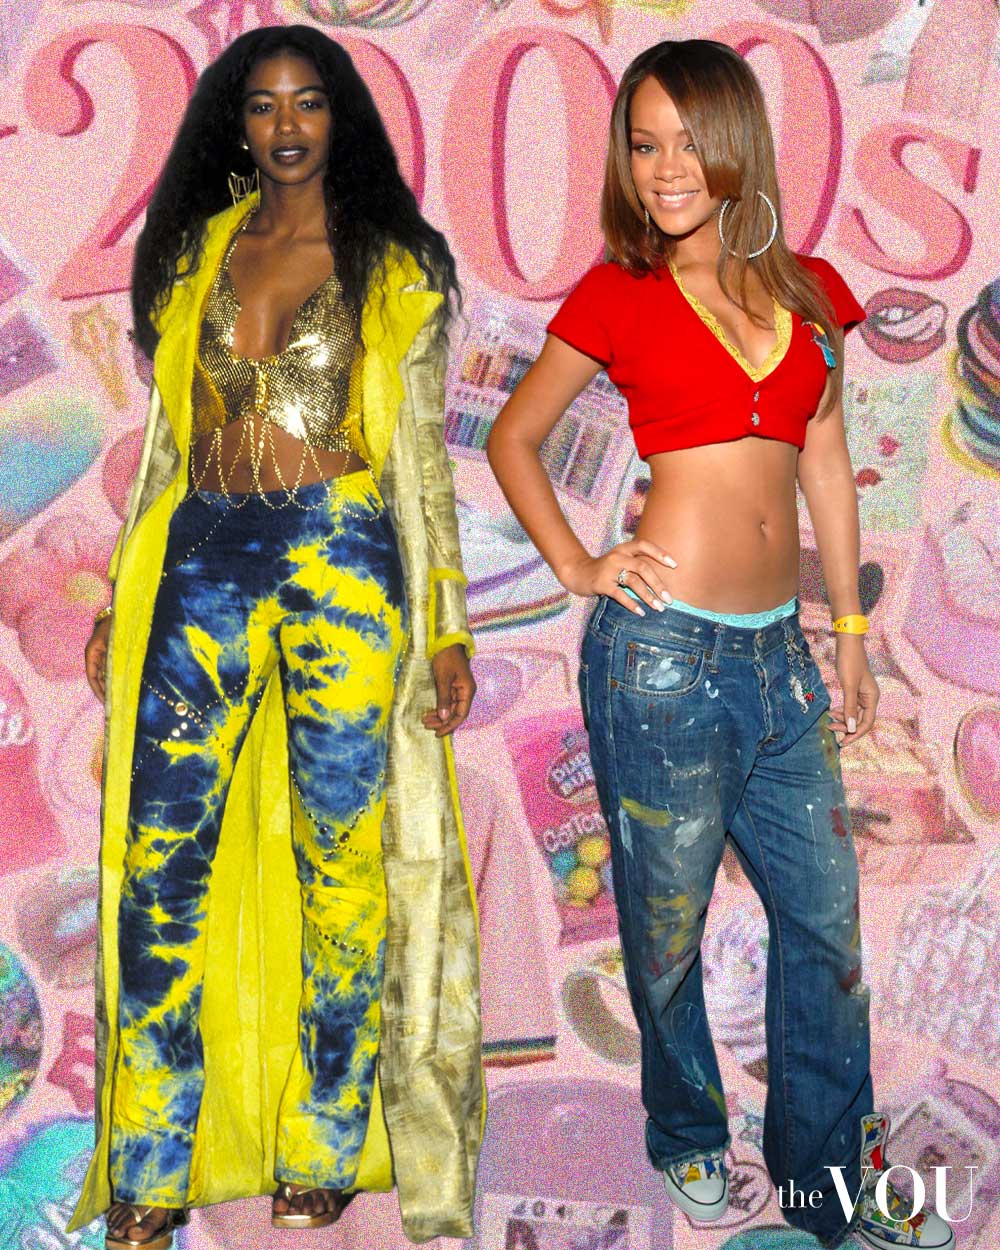 Rihanna and Ananda Lewis wearing painted jeans in 2000s fashion